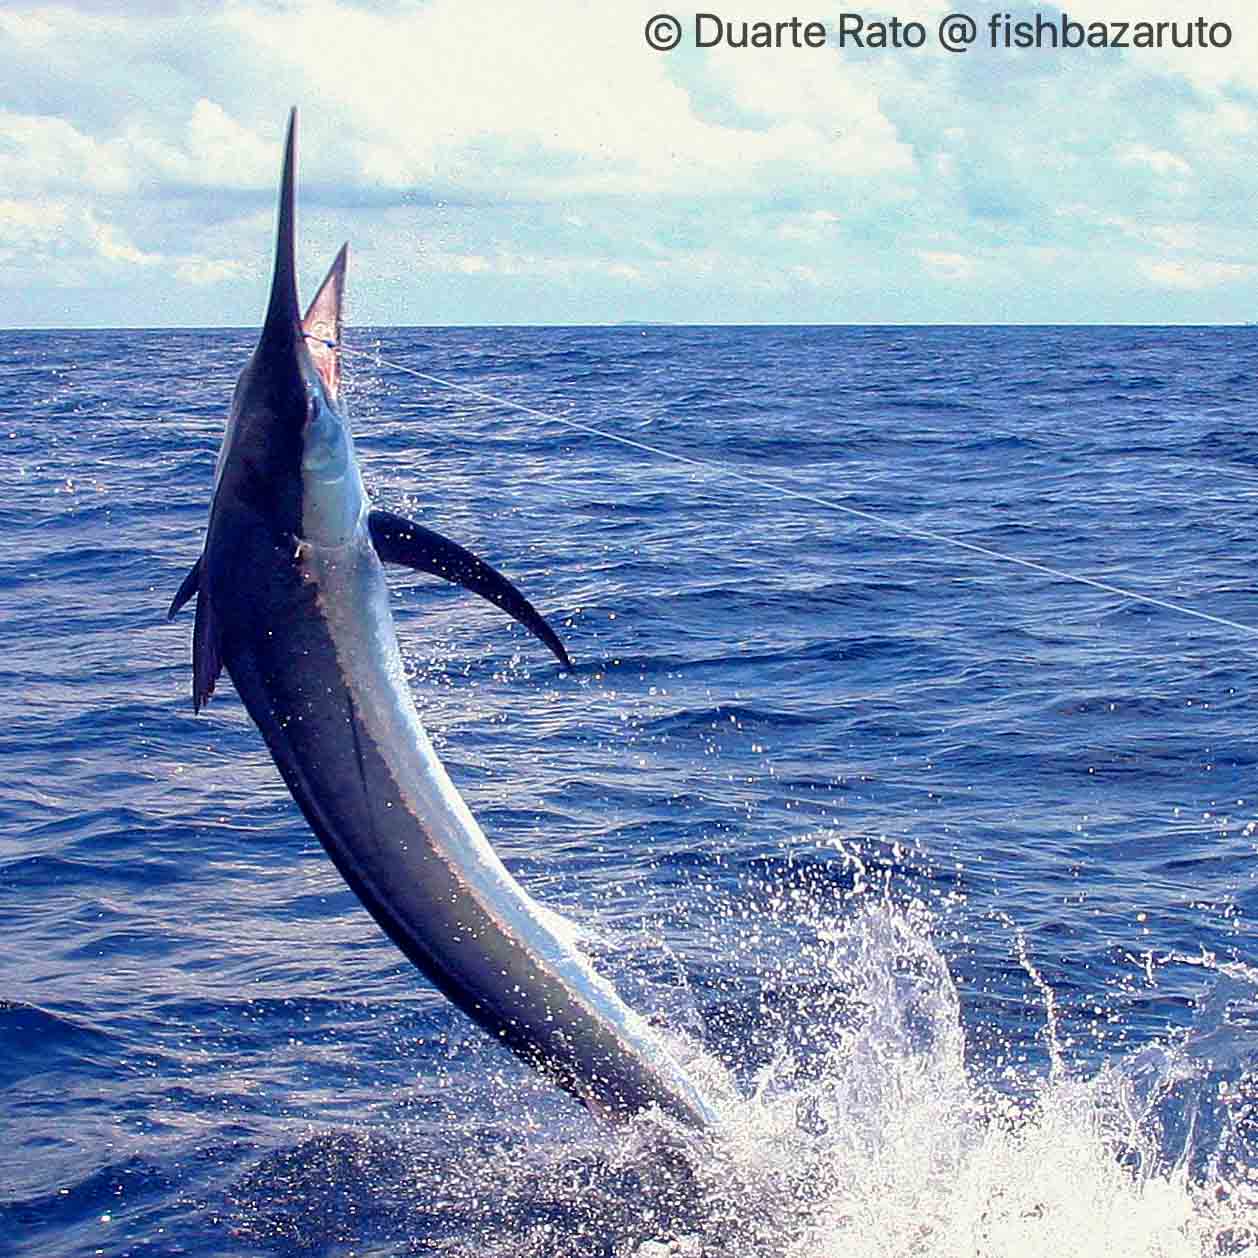 Read more about the article 2022 Marlin Season kicks off with FishBazaruto’s first scorecard posted